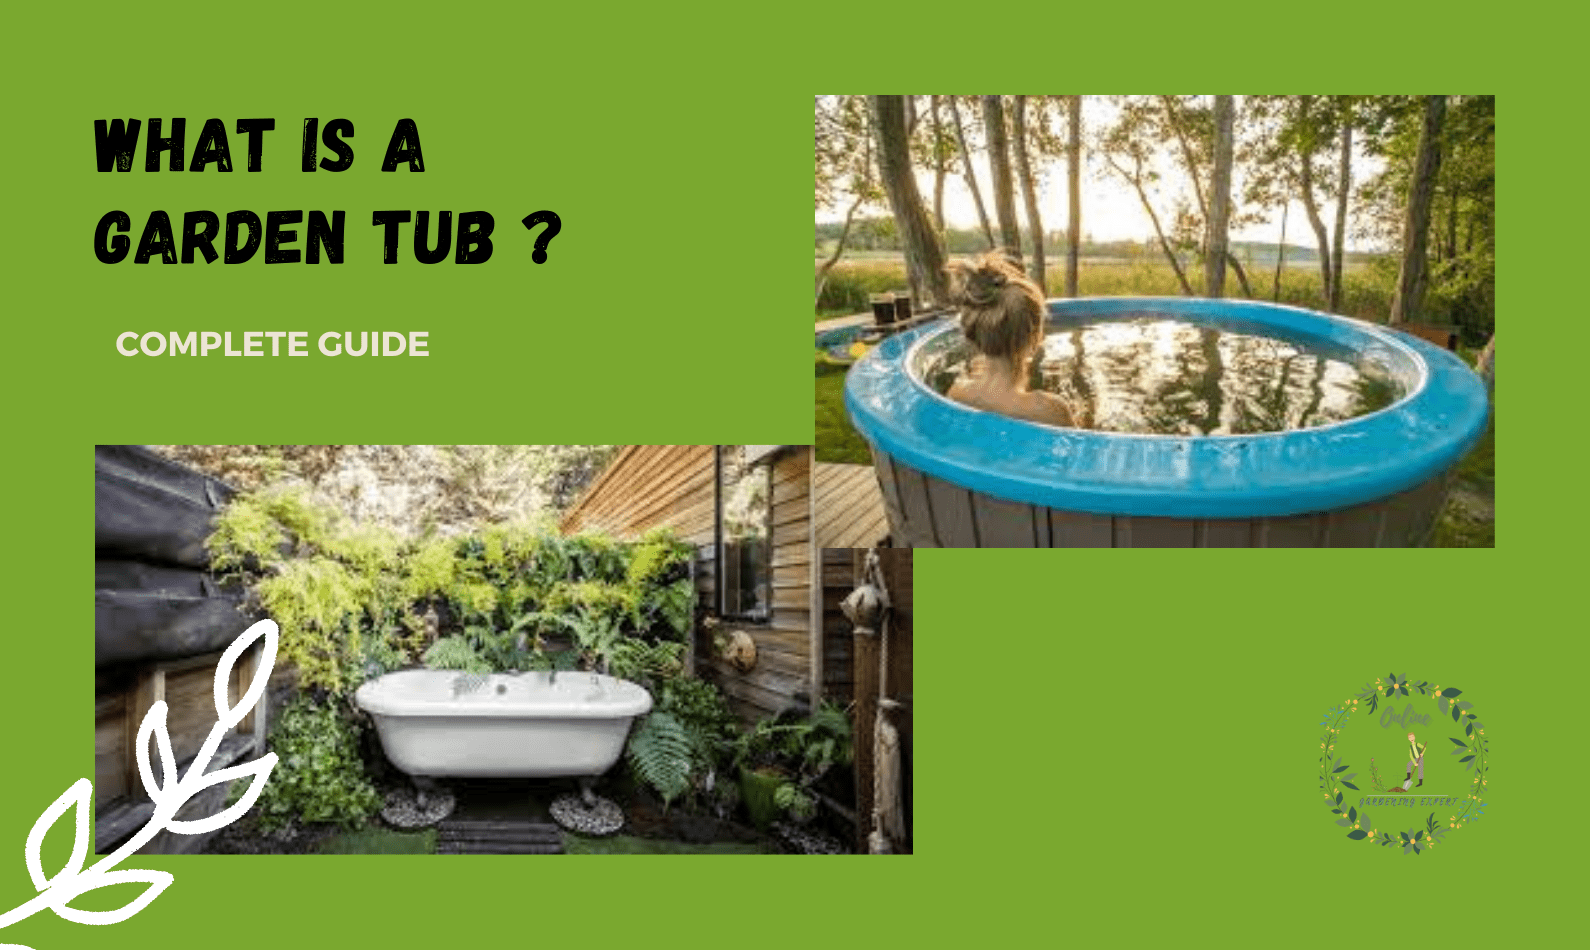 What Is a Garden Tub?